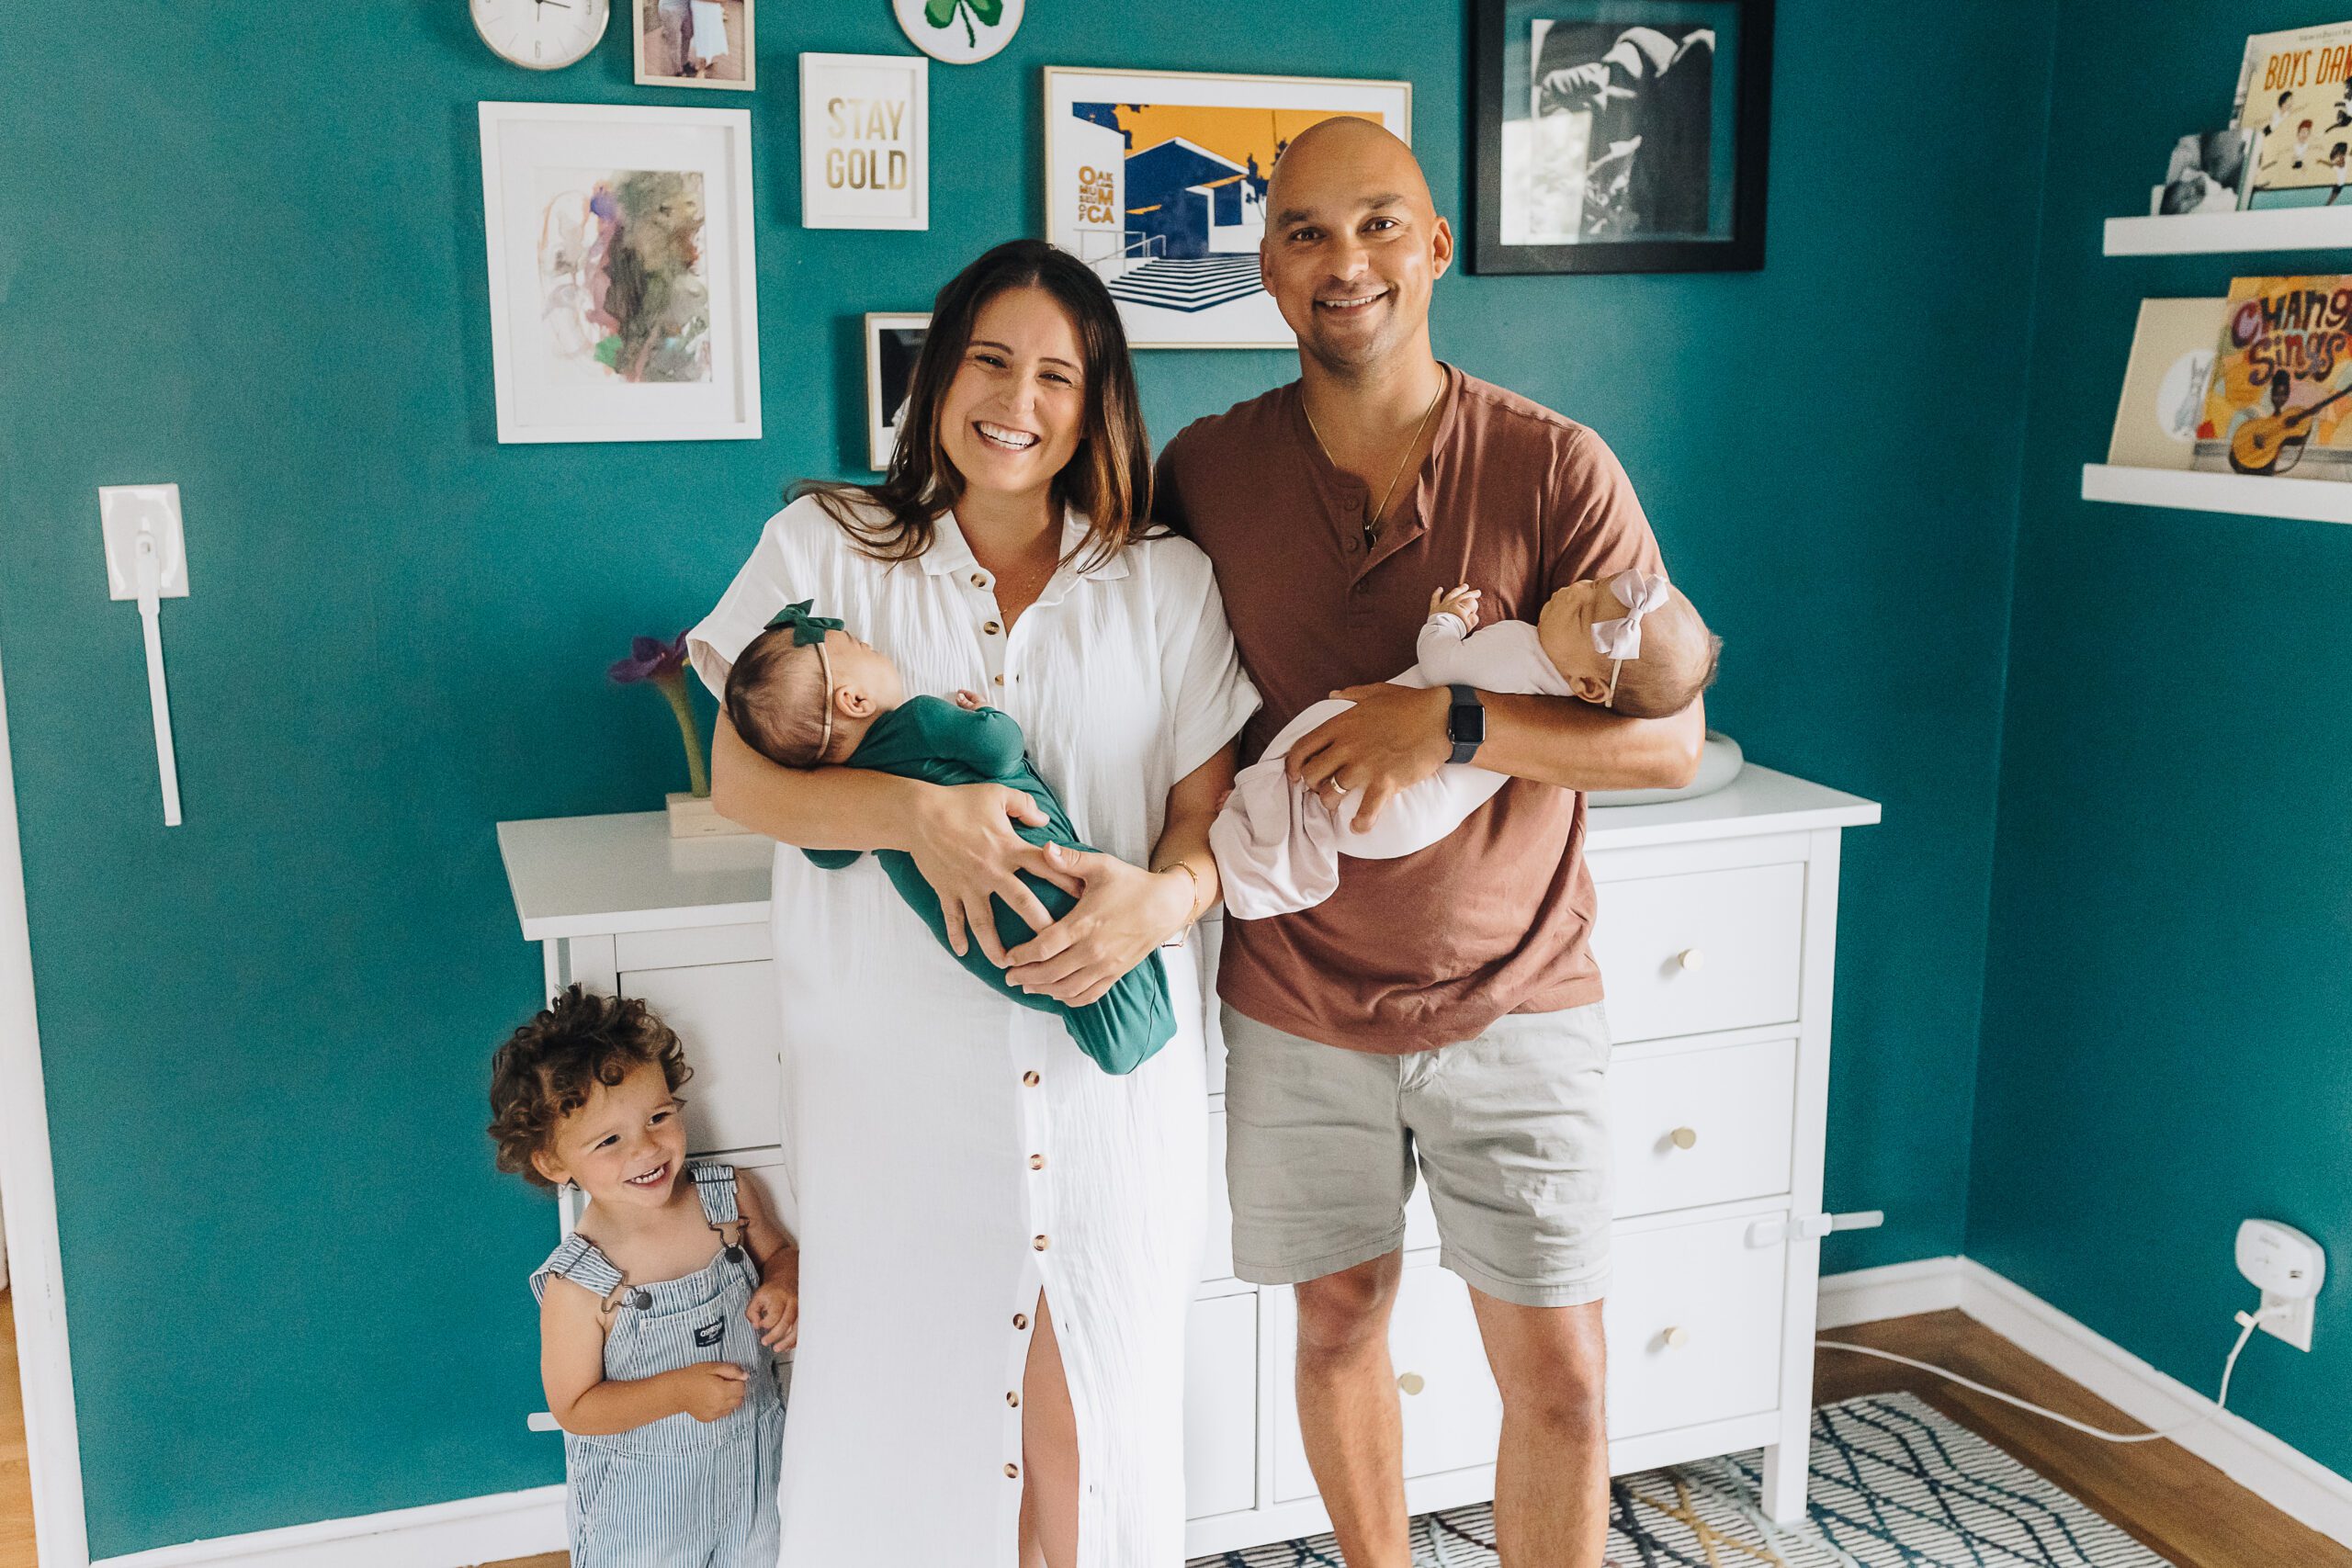 Your messy house should not deter you from scheduling an in-home newborn session. Messy houses are lived in houses and perfect for a lifestyle newborn session in the bay area.